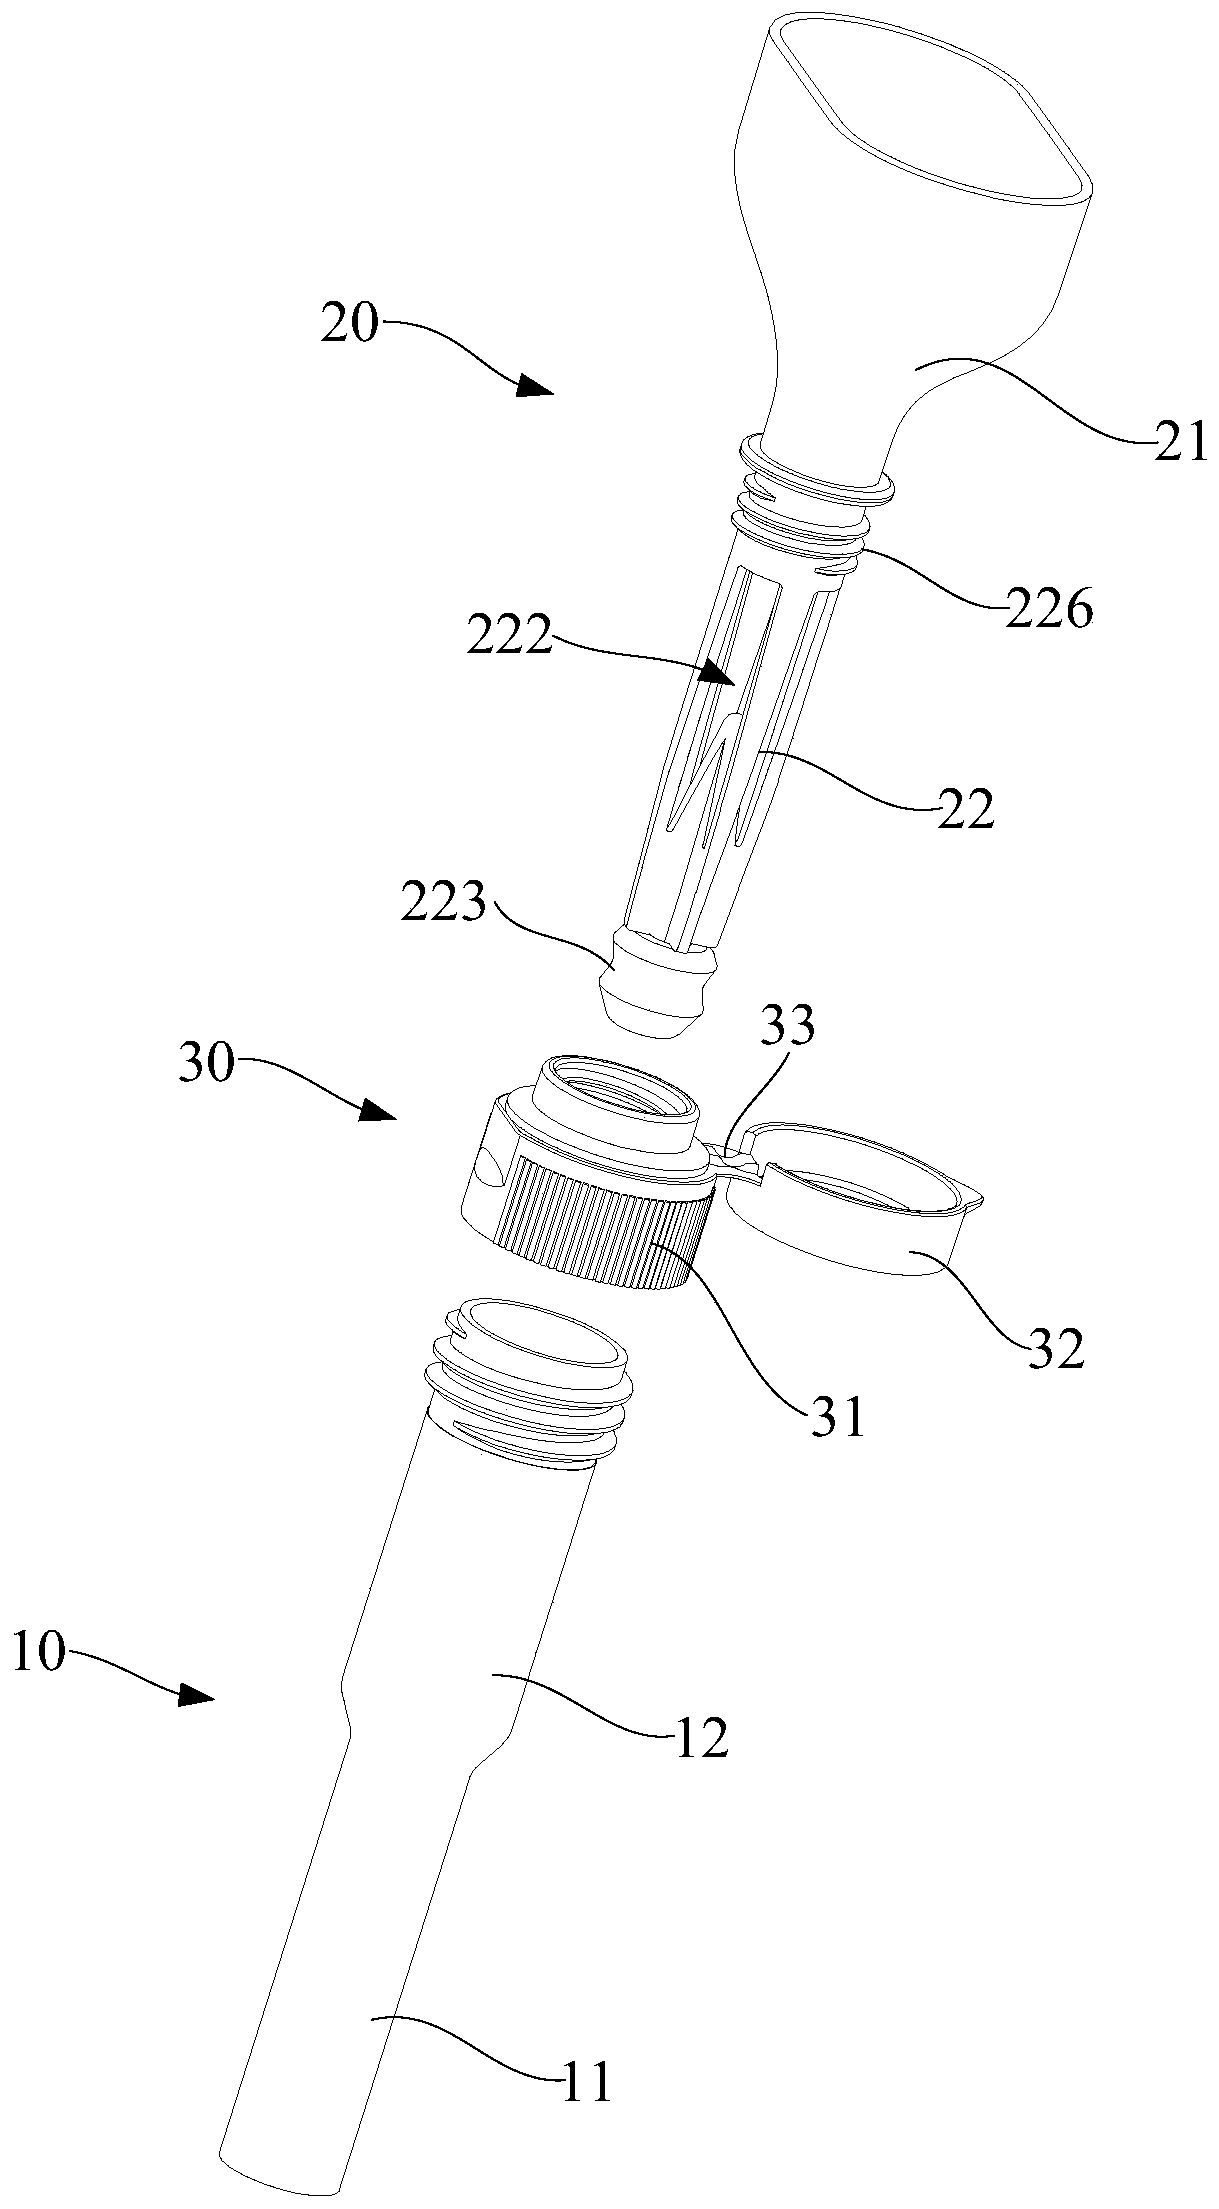 Body fluid collection device